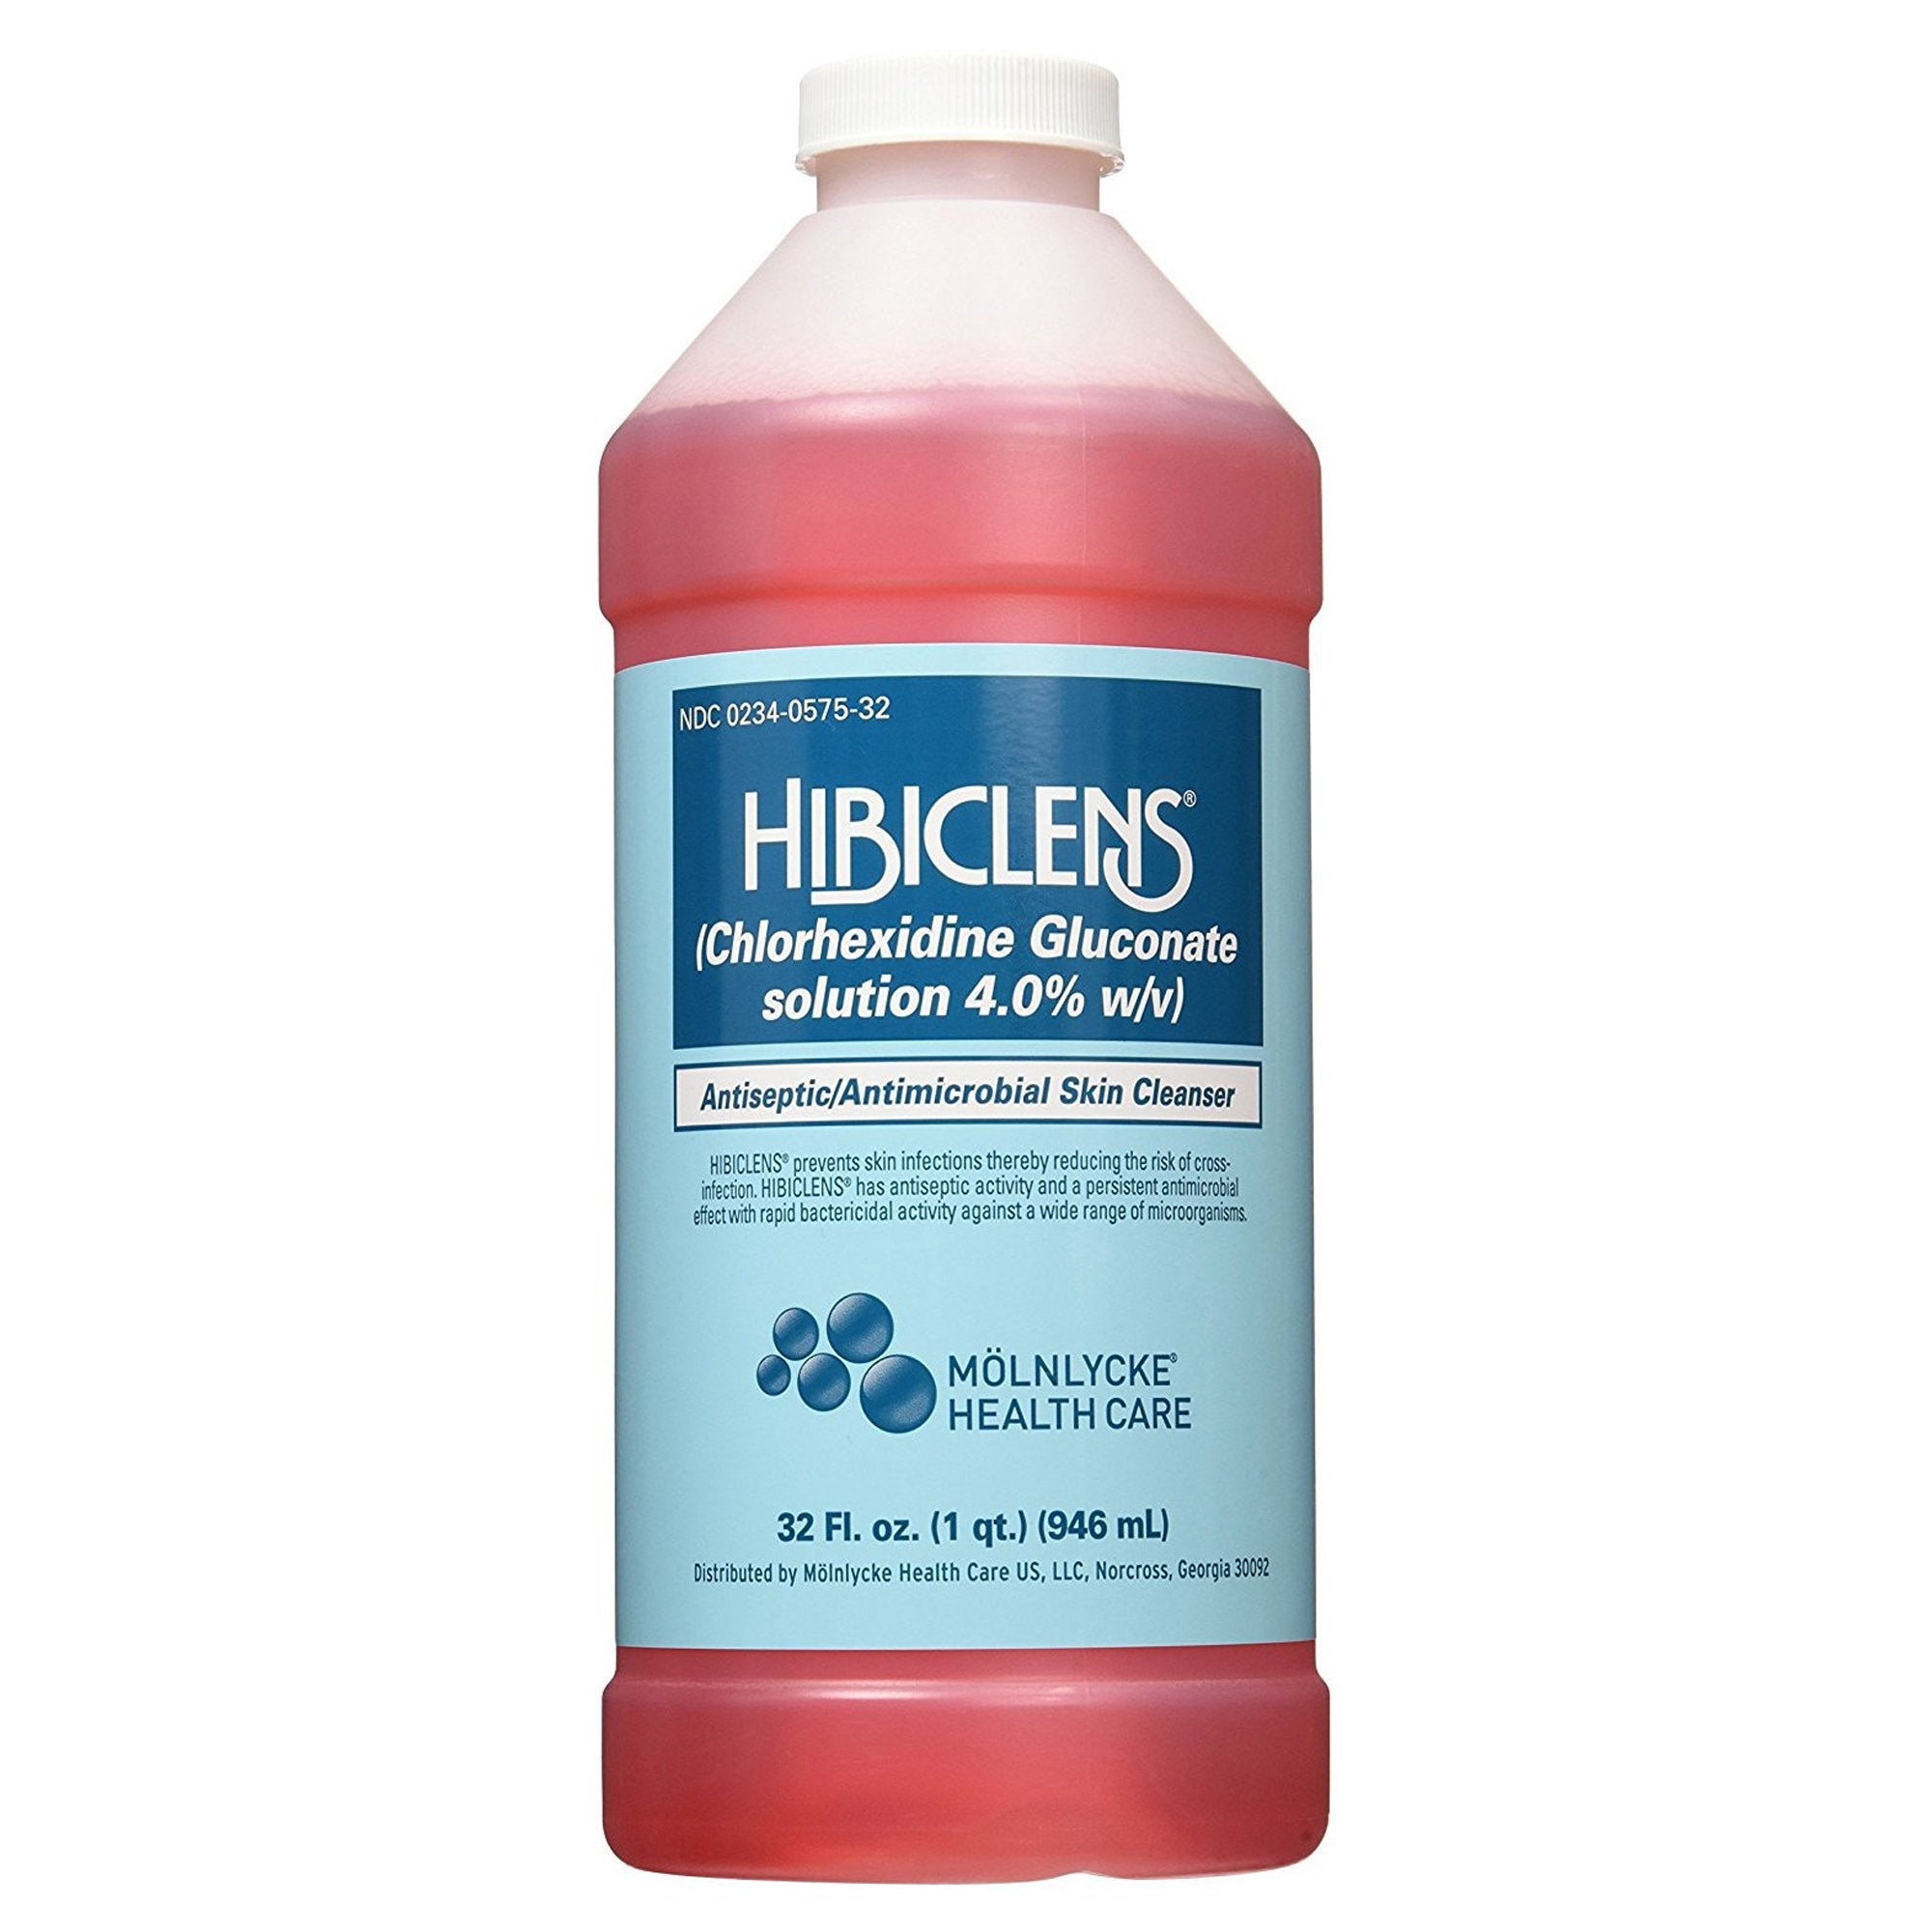 Antiseptic / Antimicrobial Skin Cleanser Hibiclens® 32 oz. Bottle